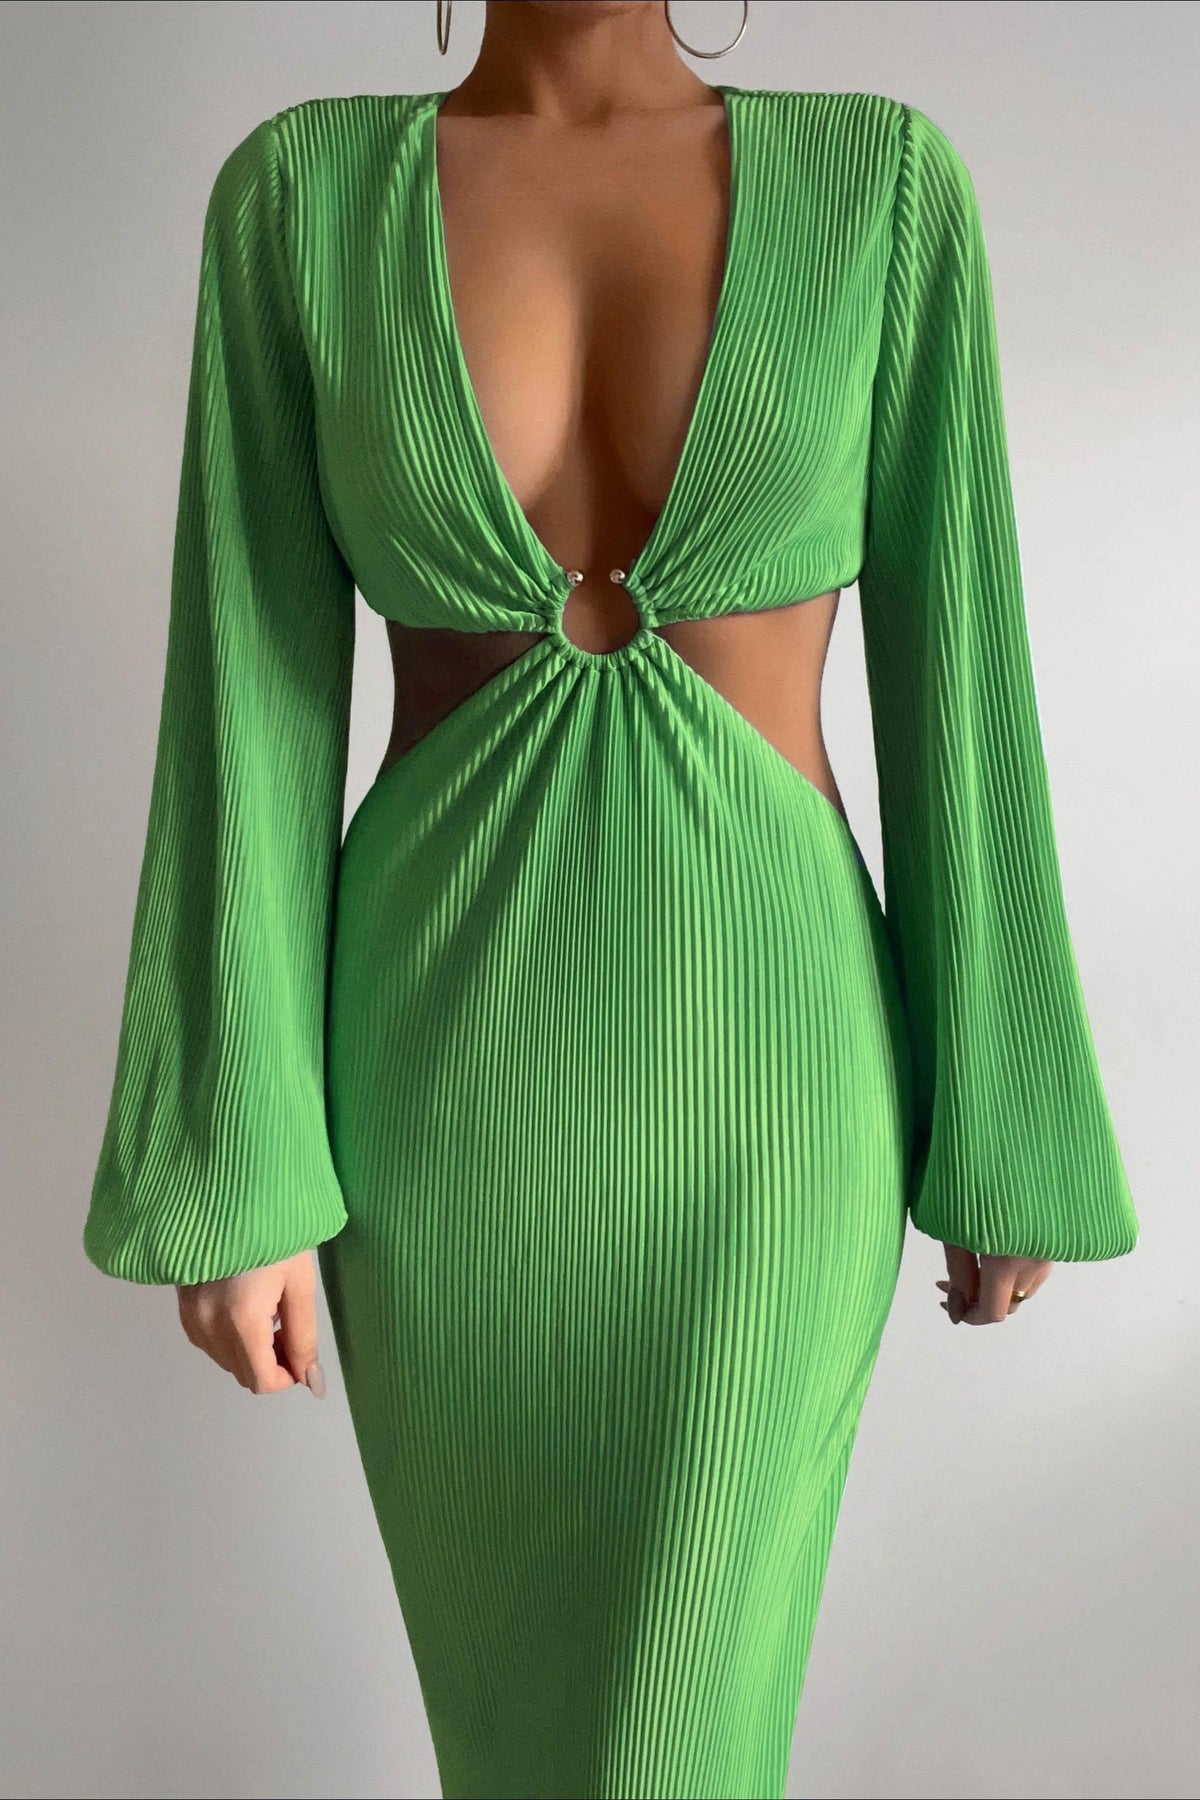 Faith Dress, BALLOON SLEEVE, CUT OUT, DRESS, DRESSES, GREEN, LONG SLEEVE, MAXI SKIRT, MIDI DRESS, NEW ARRIVALS, POLYESTER, SPECIAL OCCASION, Faith Dress only $130.00 @ MISHKAH ONLINE FASHION BOUTIQUE, Shop The Latest Women&#39;s Dresses - Our New Faith Dress is only $130.00, @ MISHKAH ONLINE FASHION BOUTIQUE-MISHKAH